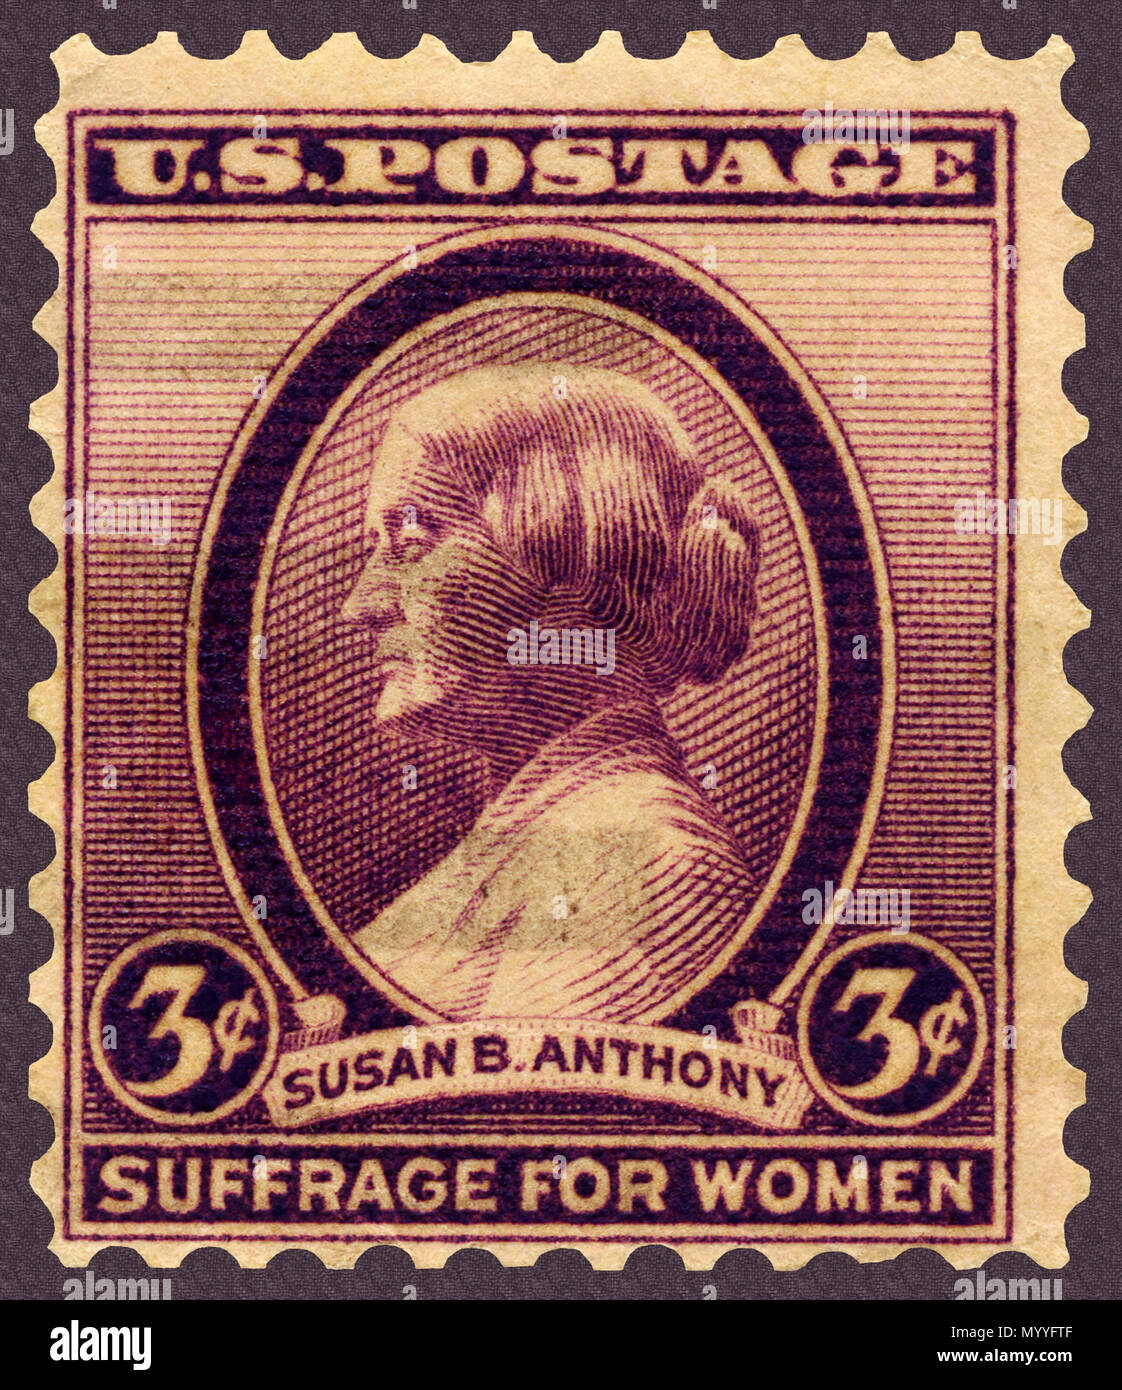 Susan B. Anthony Suffrage for Women (Voting Rights) Postage Stamp Stock Photo